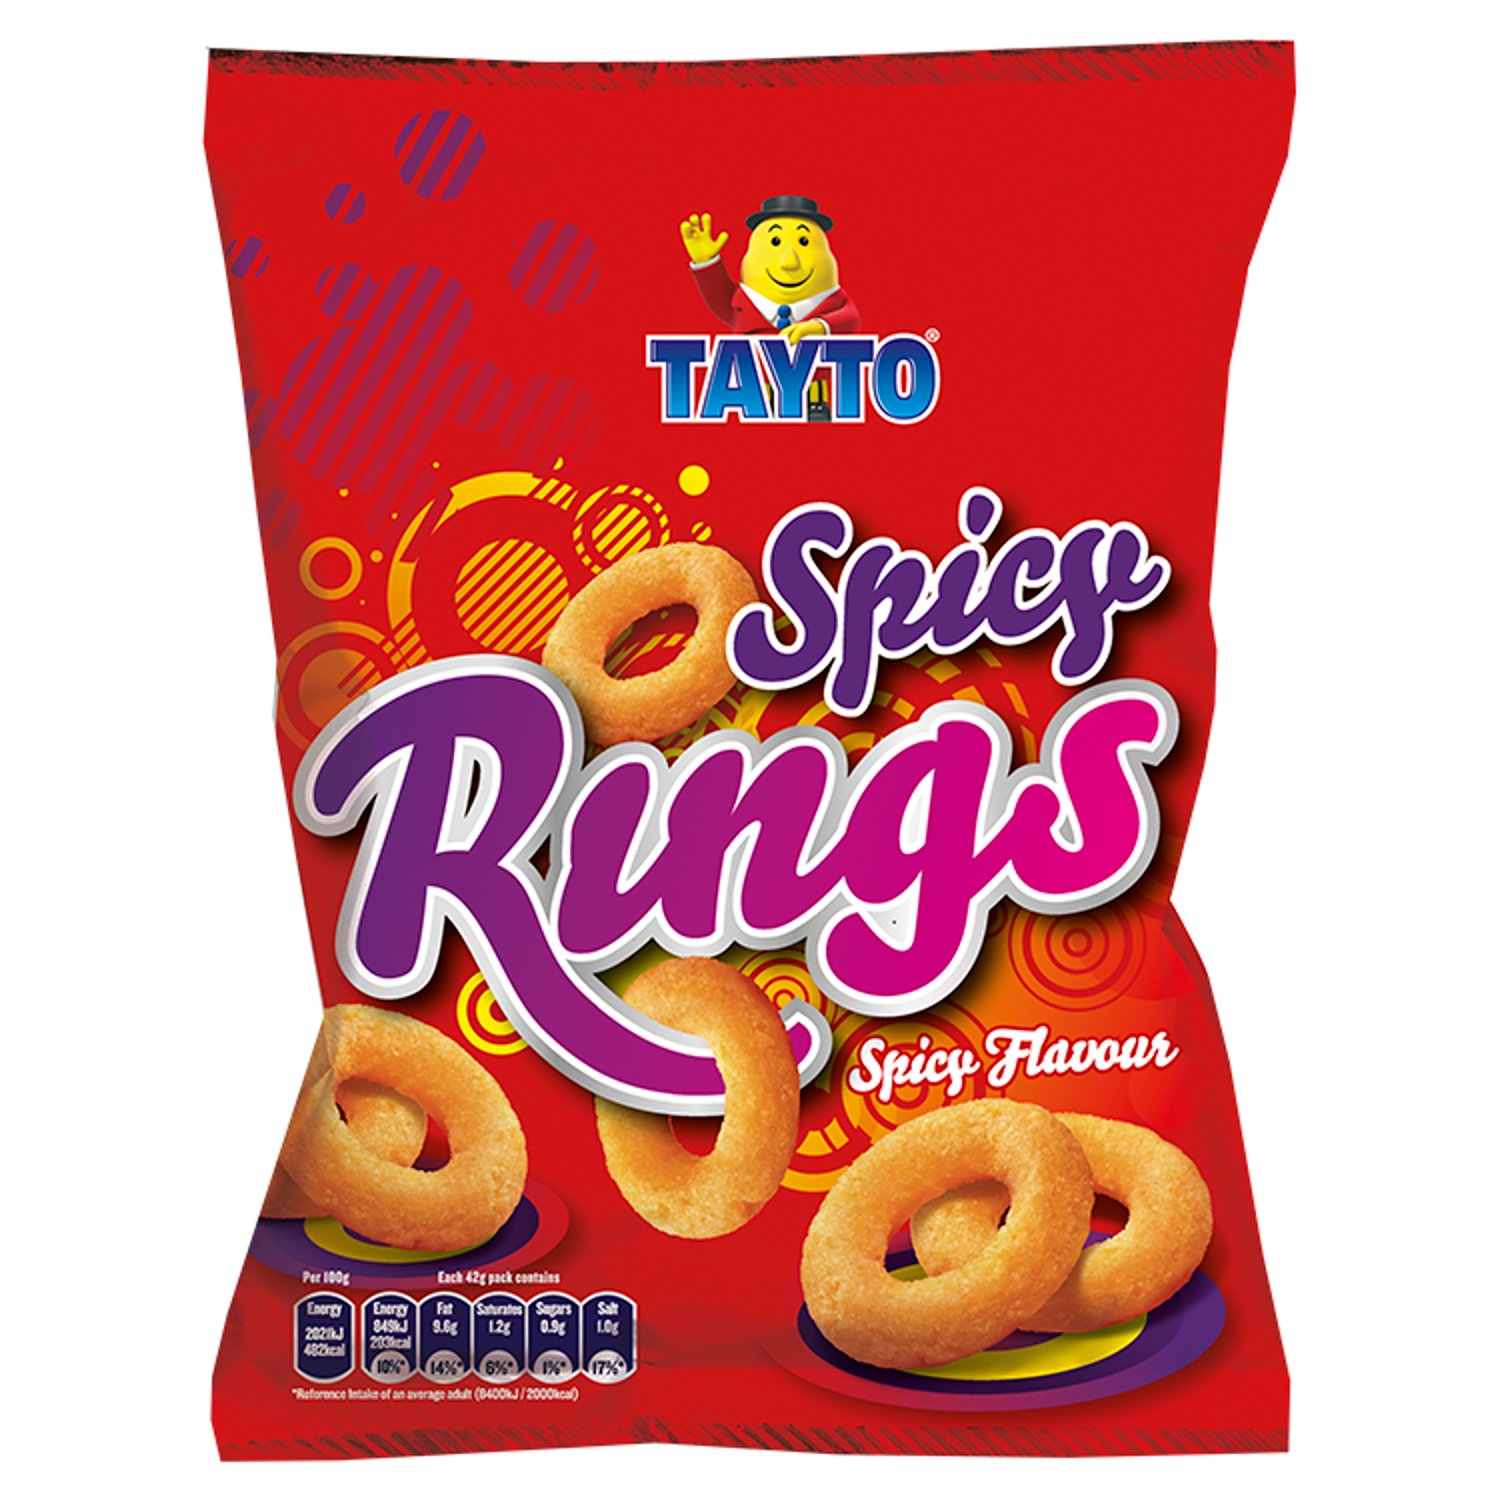 Spicy Rings - almost too hot to handle. They definitely pack a punch, sure to get you all fired up.